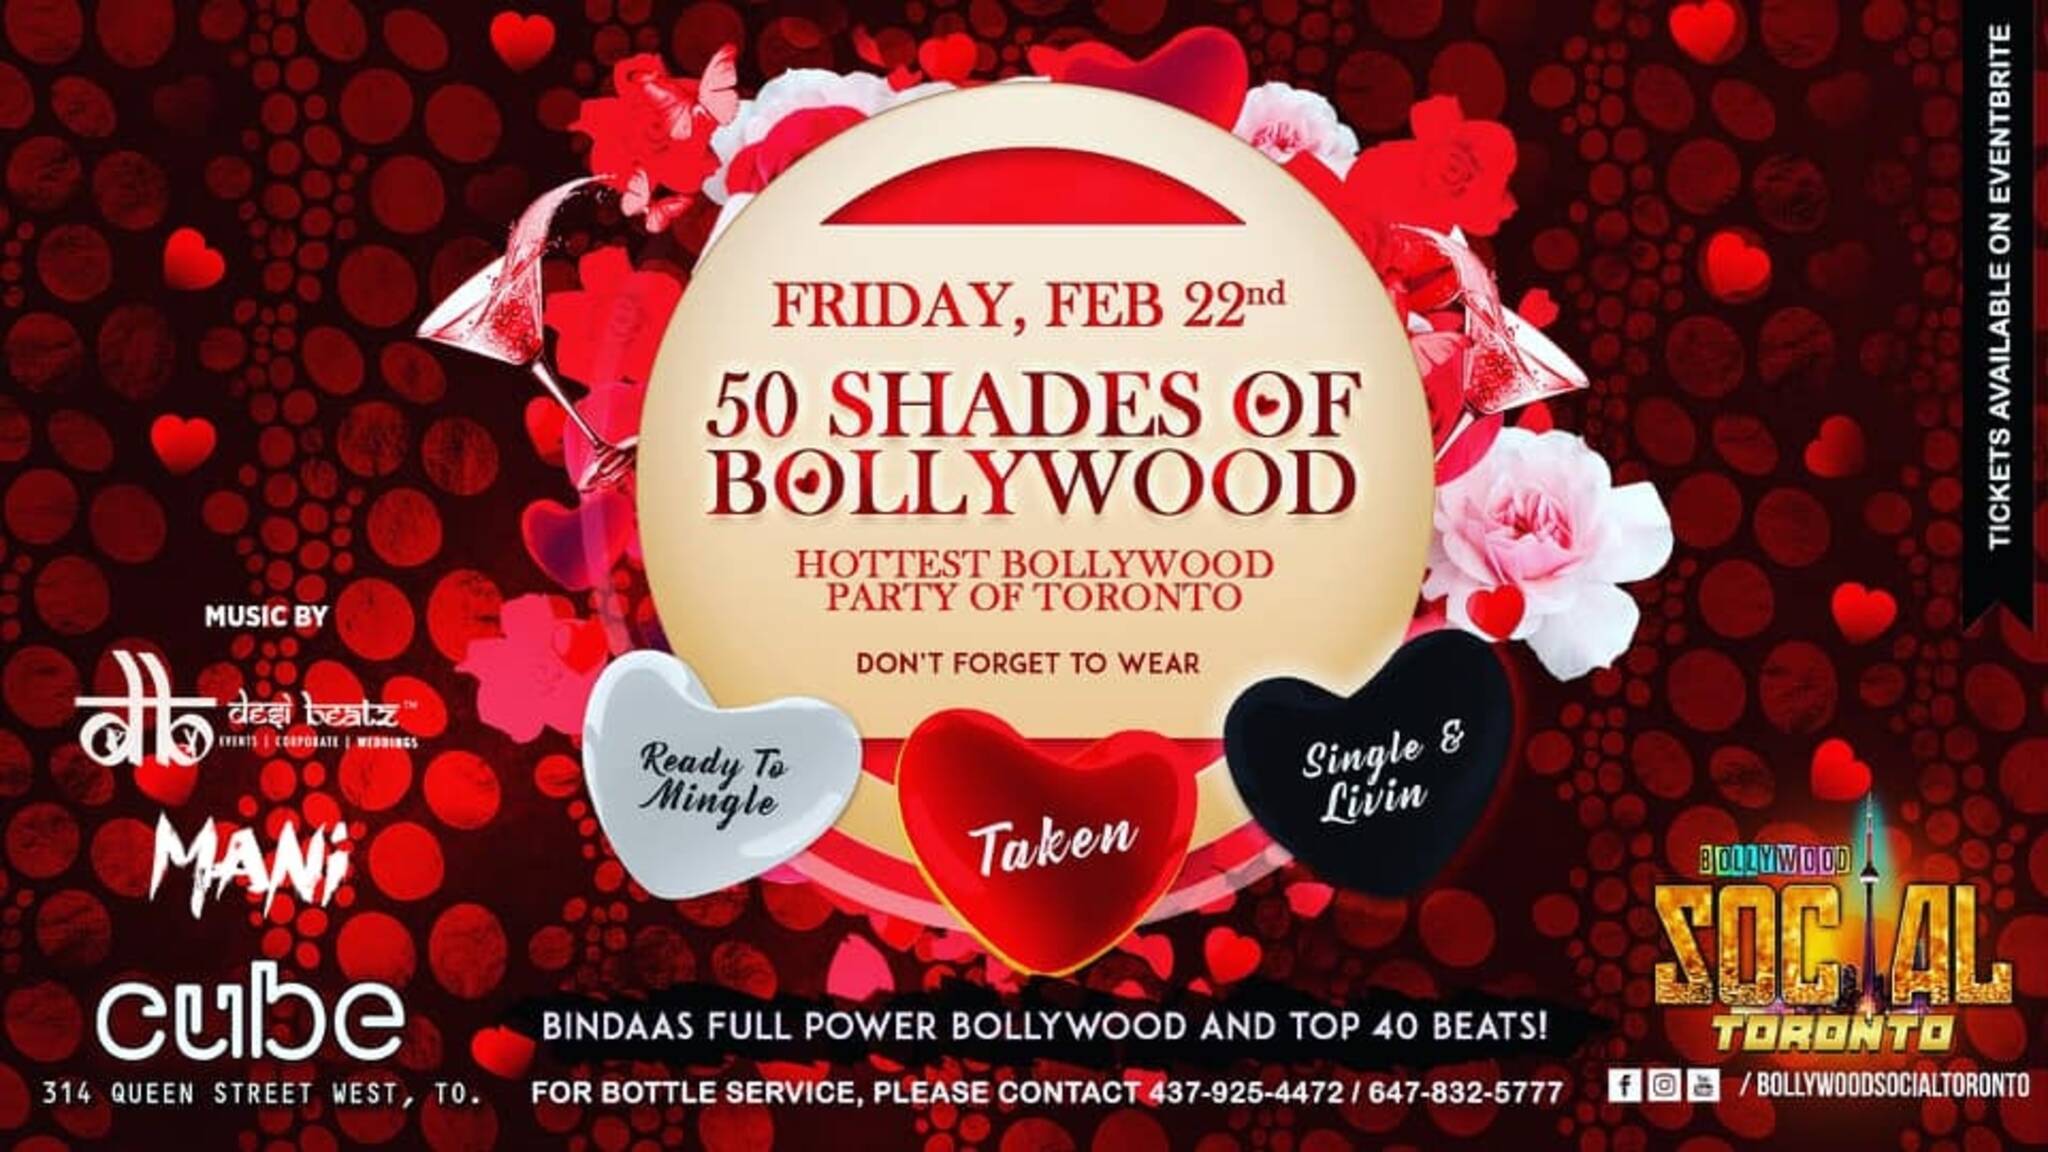 50 Shades of Bollywood Hottest Bollywood Party of Toronto!